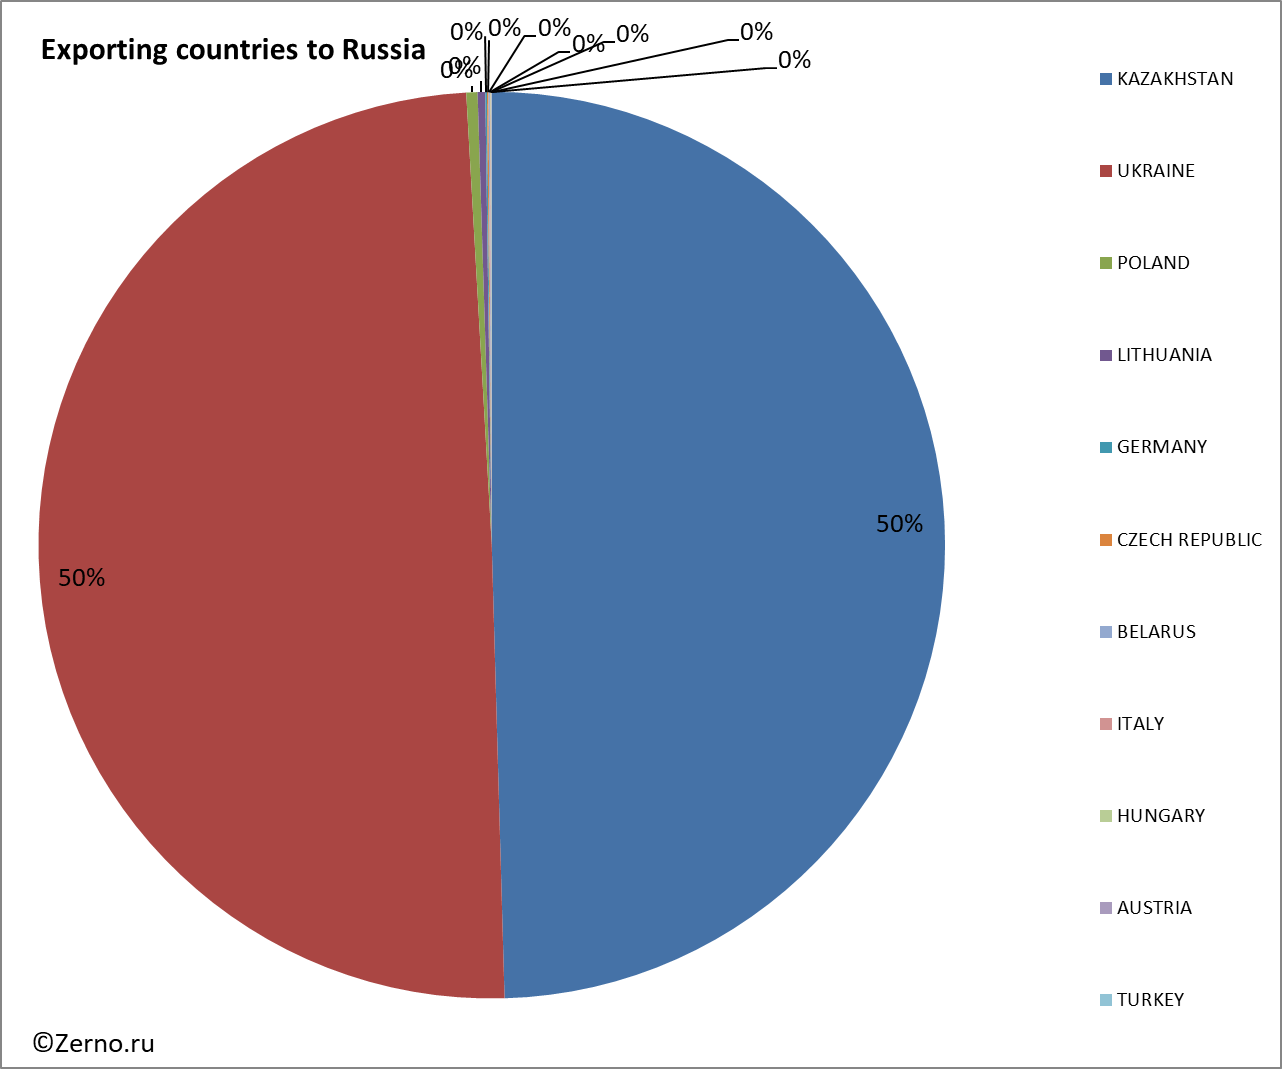 Exporting countries to Russia